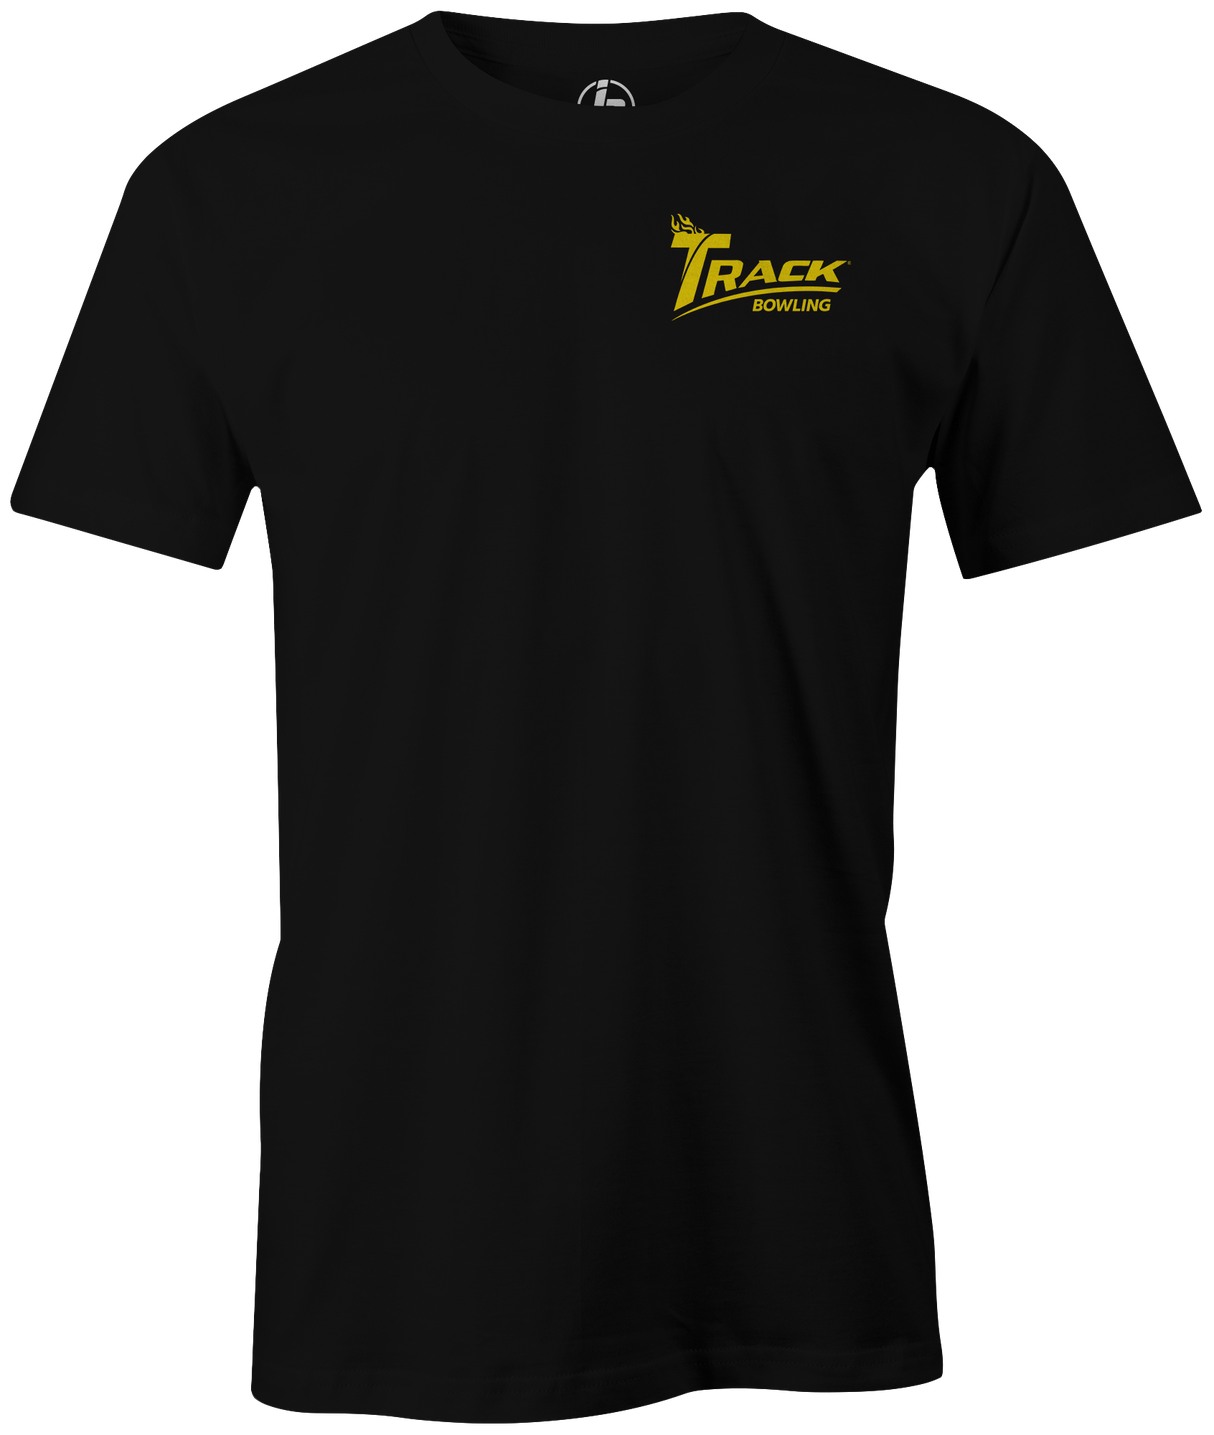 Track Bowling Practice Tee Hit the lanes in this awesome Inside Bowling T-shirt and be a part of the team! League bowling Team shirt. Junior Gold. PBA. PWBA. tee, tee shirt, tee-shirt, tshirt, t shirt, tournament shirt. Cool, novelty. Men's. Brunswick Bowling Practice Tee Hit the lanes in this awesome Inside Bowling T-shirt and be a part of the team! League bowling Team shirt. Junior Gold. PBA. PWBA. tee, tee shirt, tee-shirt, tshirt, t shirt, tournament shirt. Cool, novelty. Men's. 